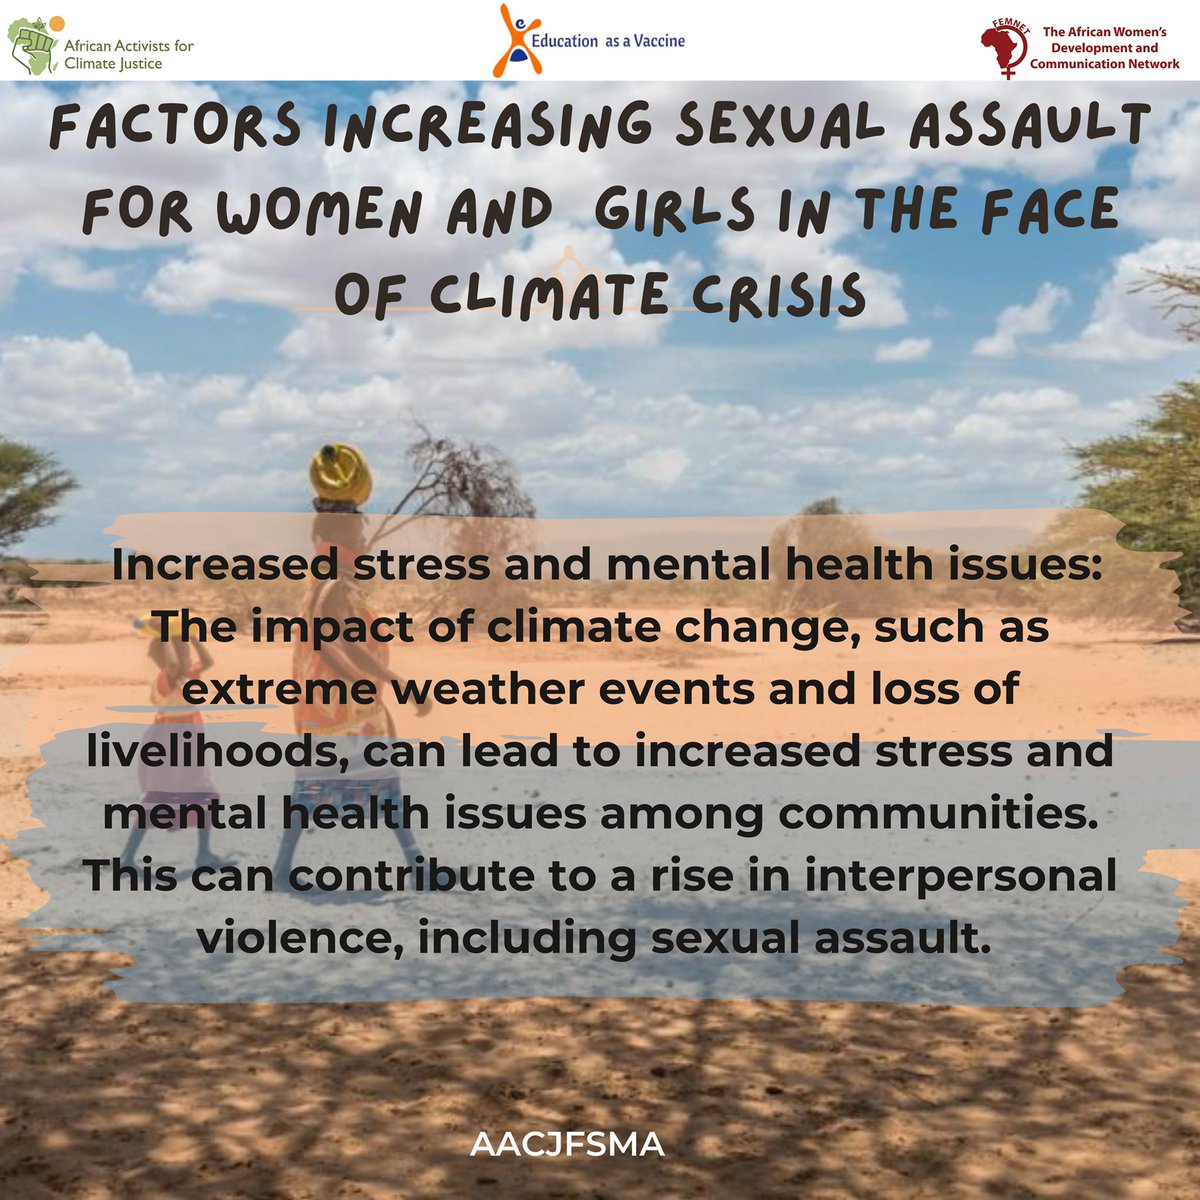 To commensurate with the theme of this year’s Sexual Assault Awareness Month “Building Connected Communities” we highlight some of the factors contributing to the high prevalence of Sexual assault in communities that are affected by climate change. 

#SAAM #AACJFSMA